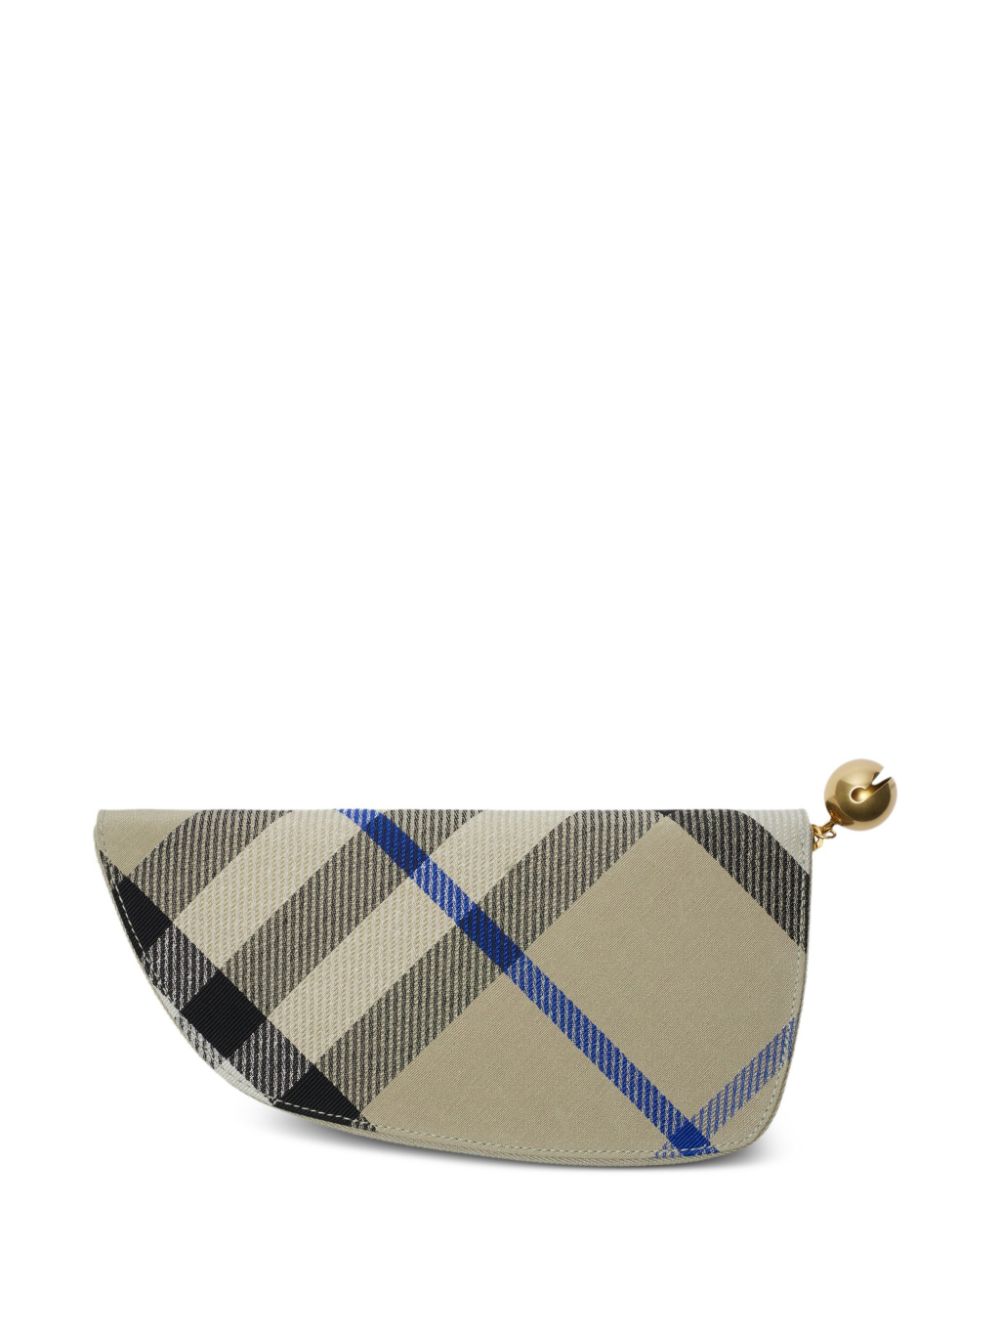 Burberry large Shield checked wallet - Beige